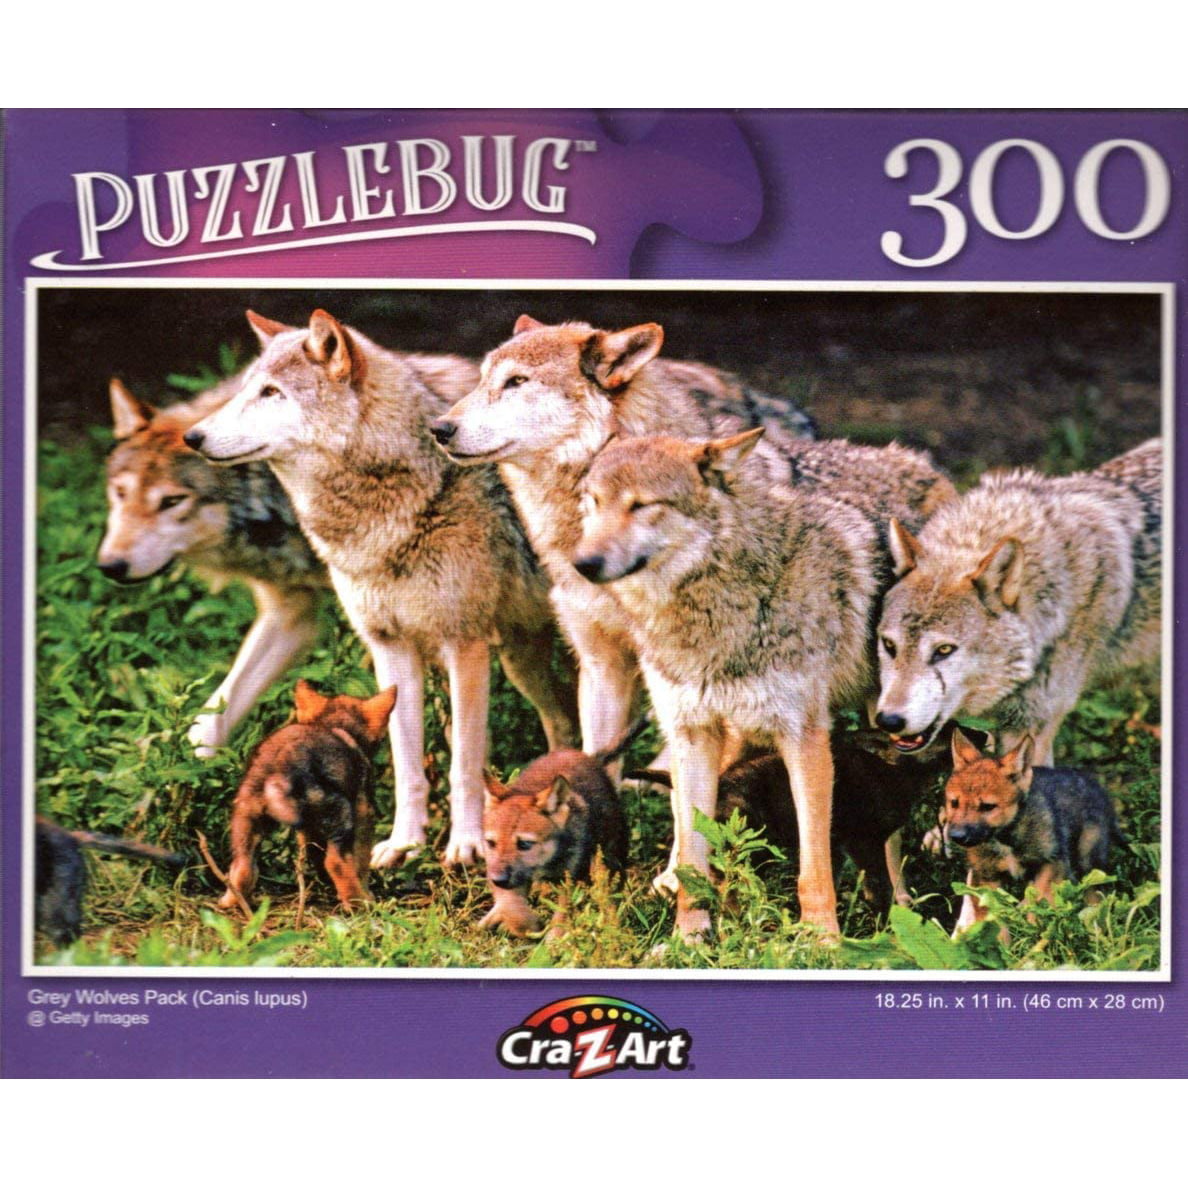 Grey Wolves Pack 18.25" X 11" Puzzle 300 Piece Puzzlebug 